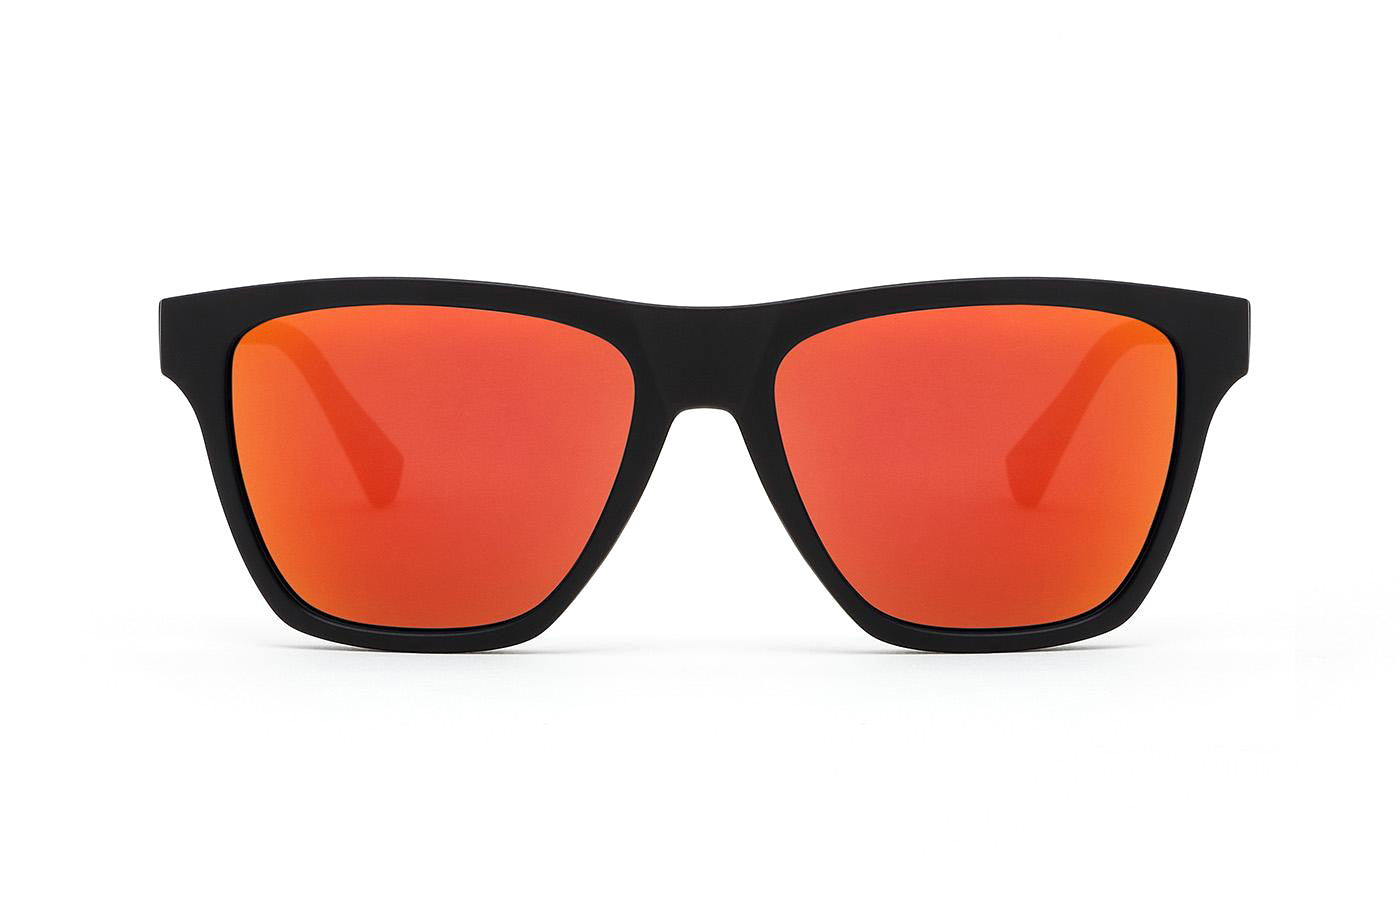 HAWKERS - ONE Carbon Black Daylight For Men and Women UV400